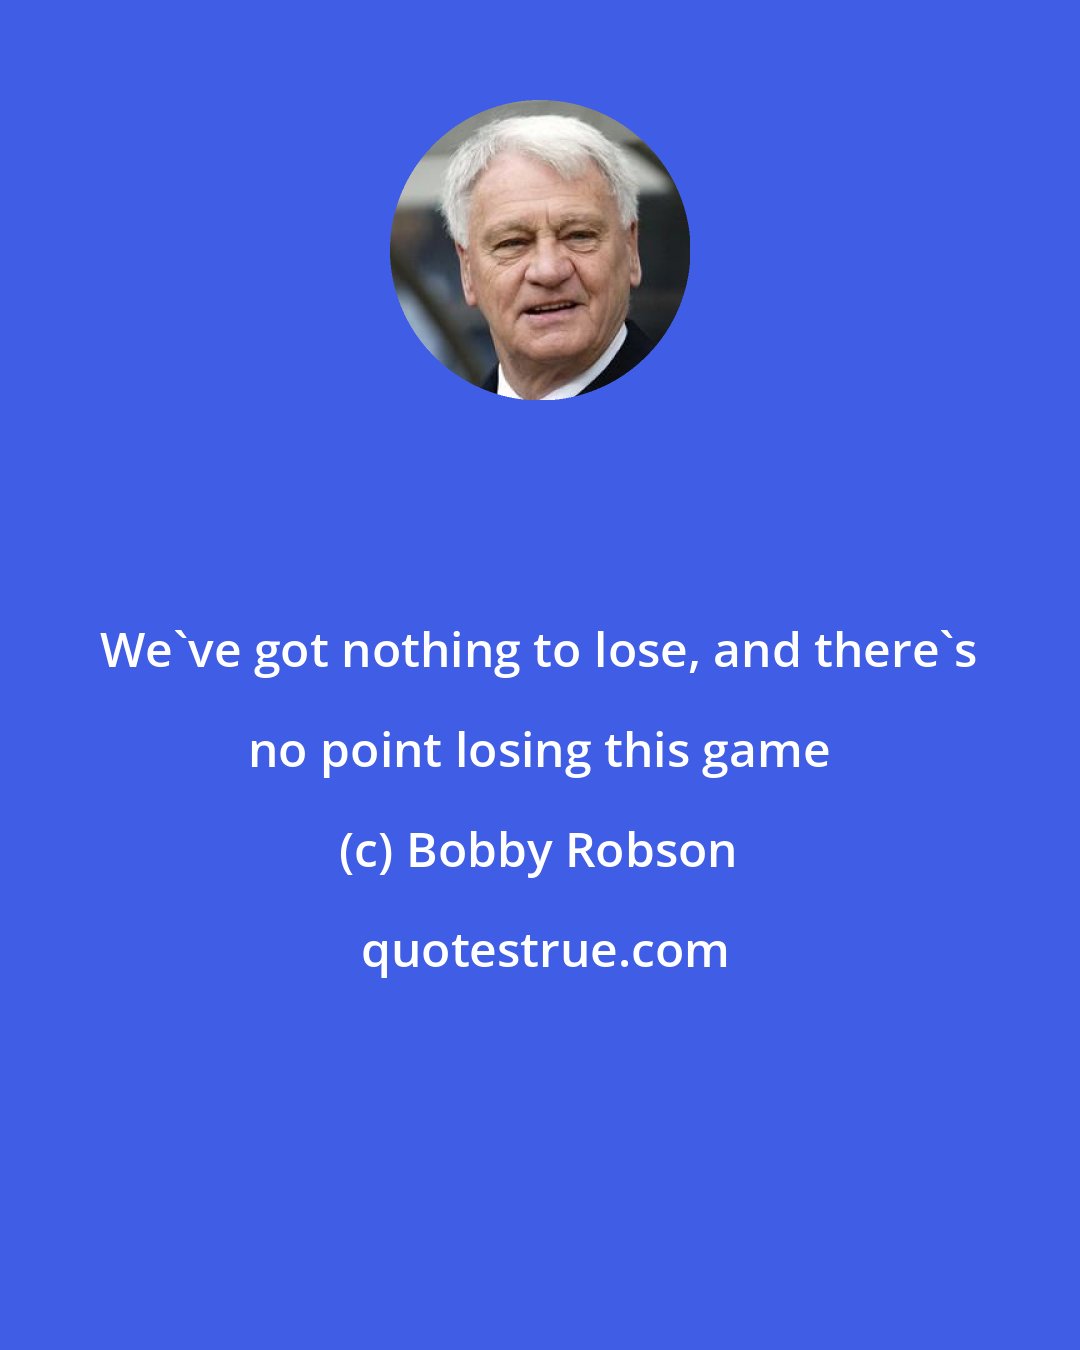 Bobby Robson: We've got nothing to lose, and there's no point losing this game